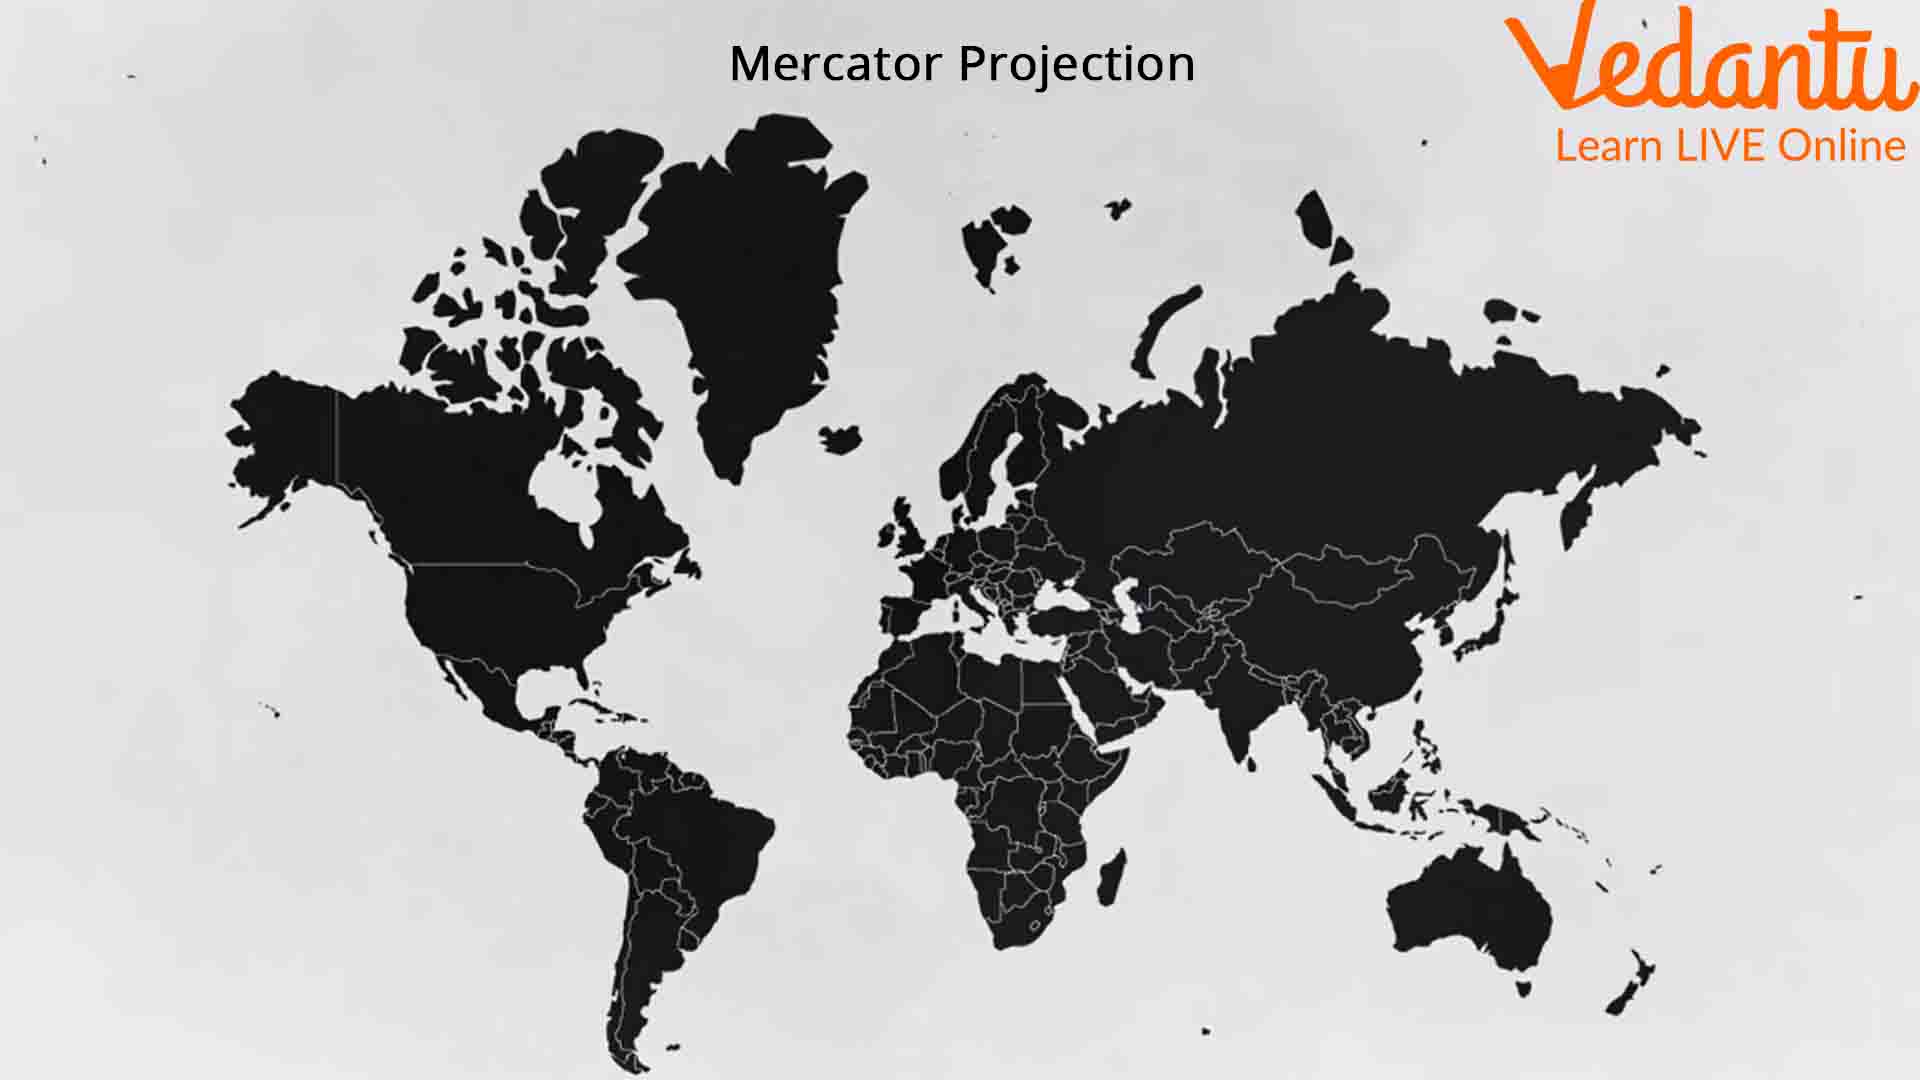 Mercator Projection of the World